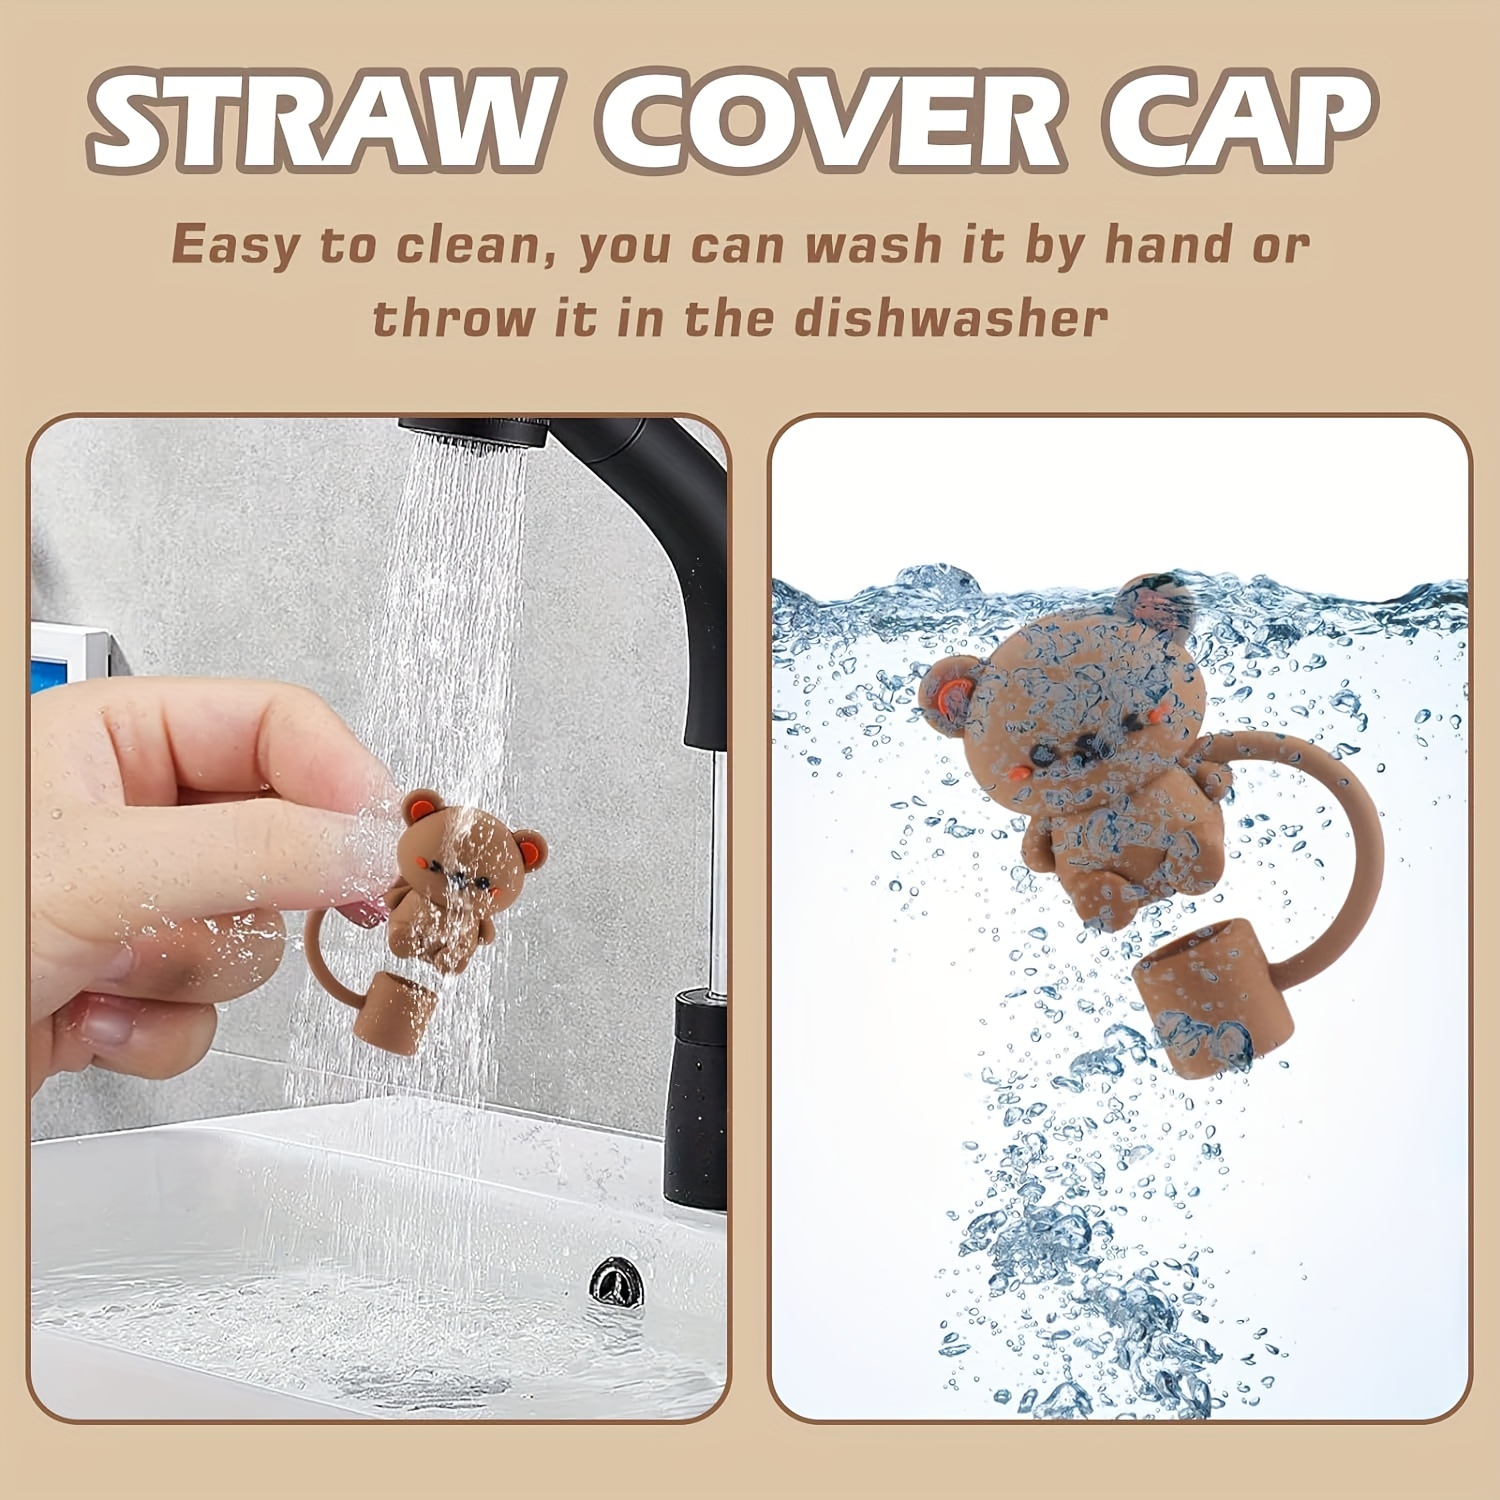 Straw Covers Cap for 7-8mm Straws - 8 Pcs Yo-Da Straw Tip Covers Compatible with Stanley 40 oz 30 oz Tumbler Cups, Reusable Silicone Straw Topper